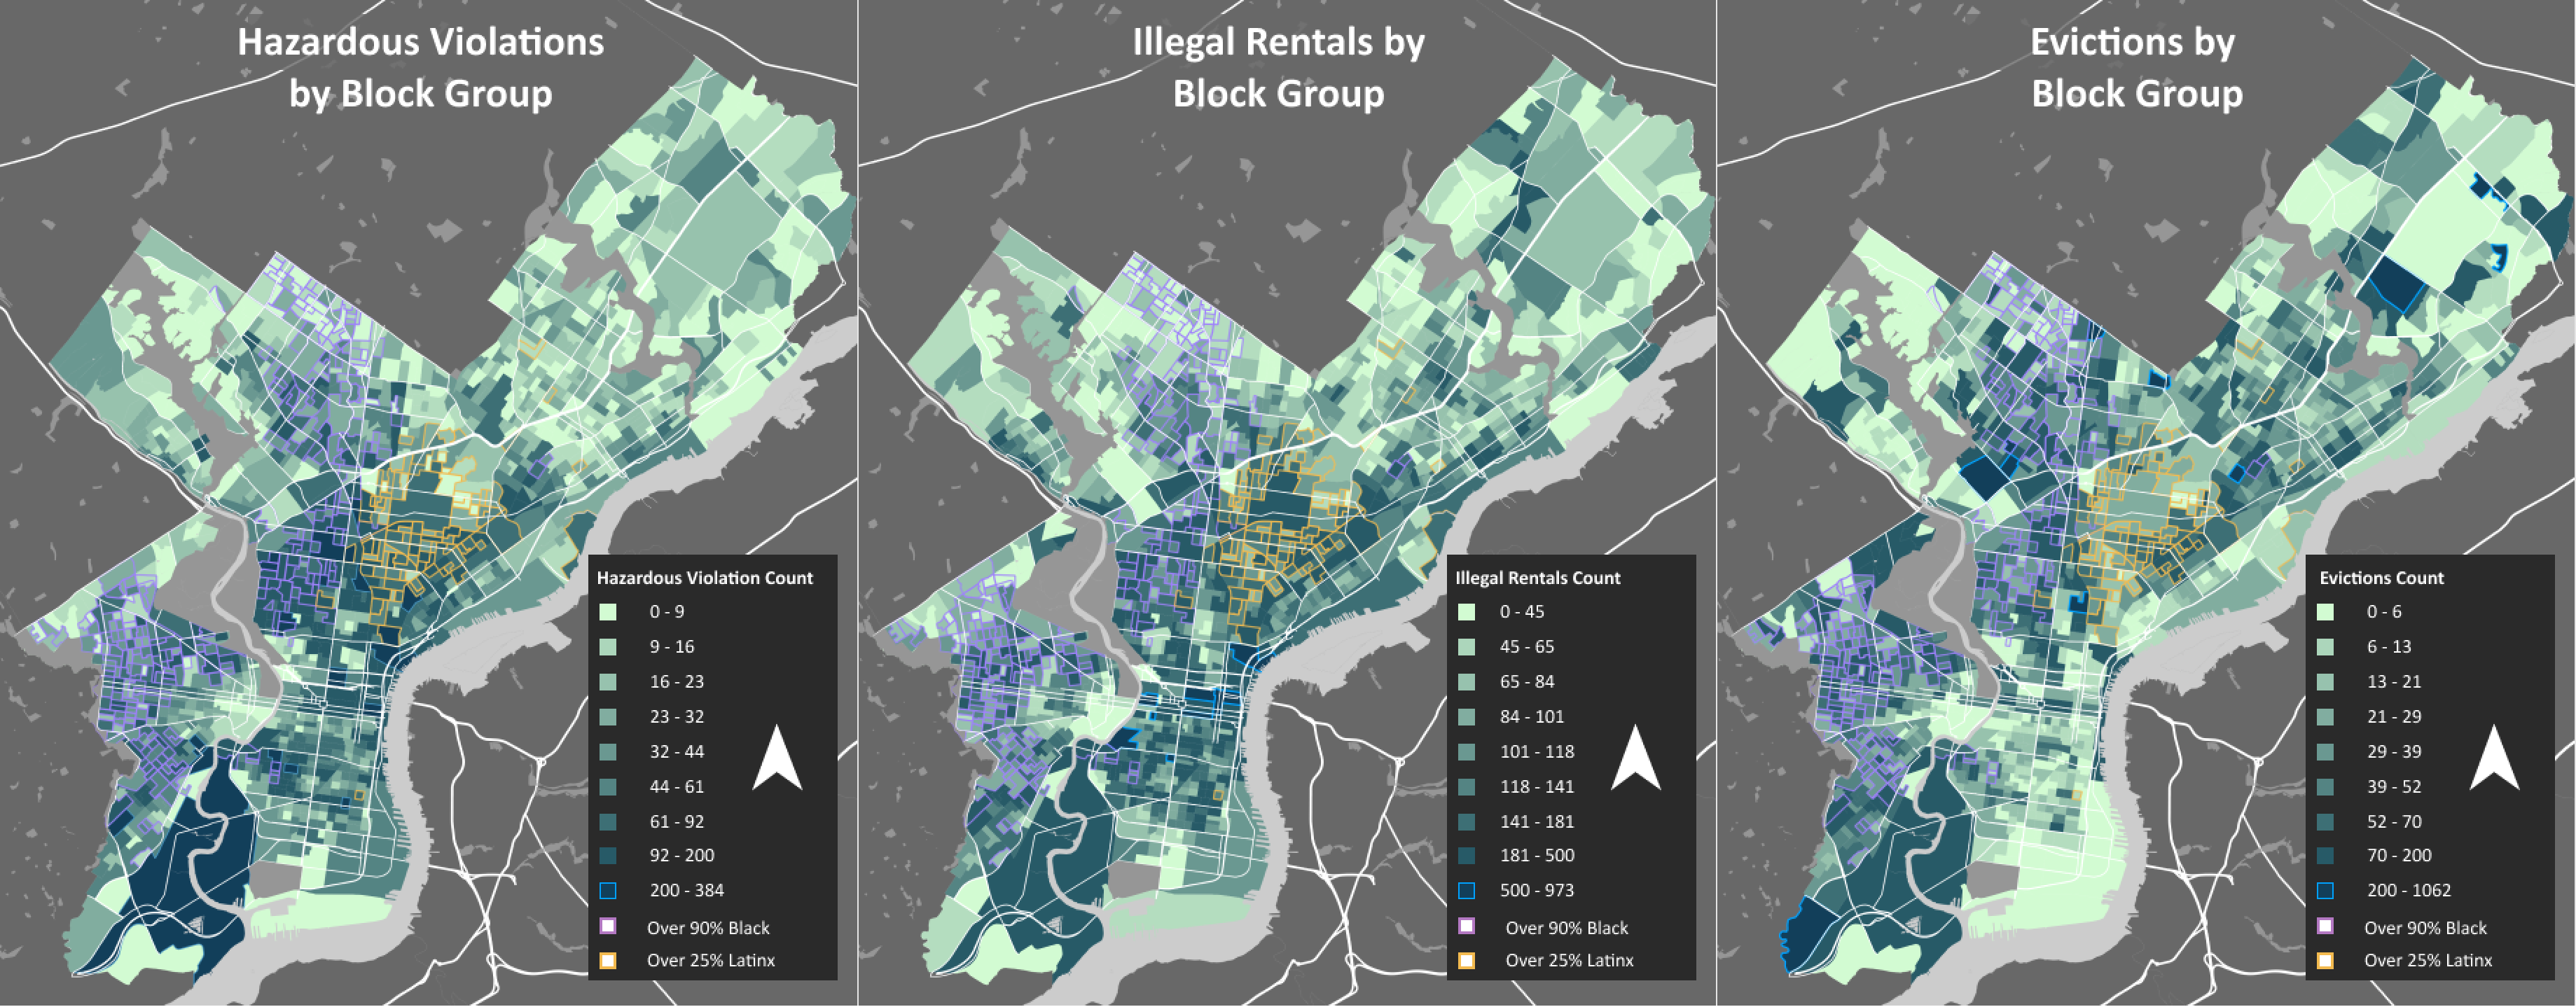 Violations, Illegal rentals, Evictions by Block Group